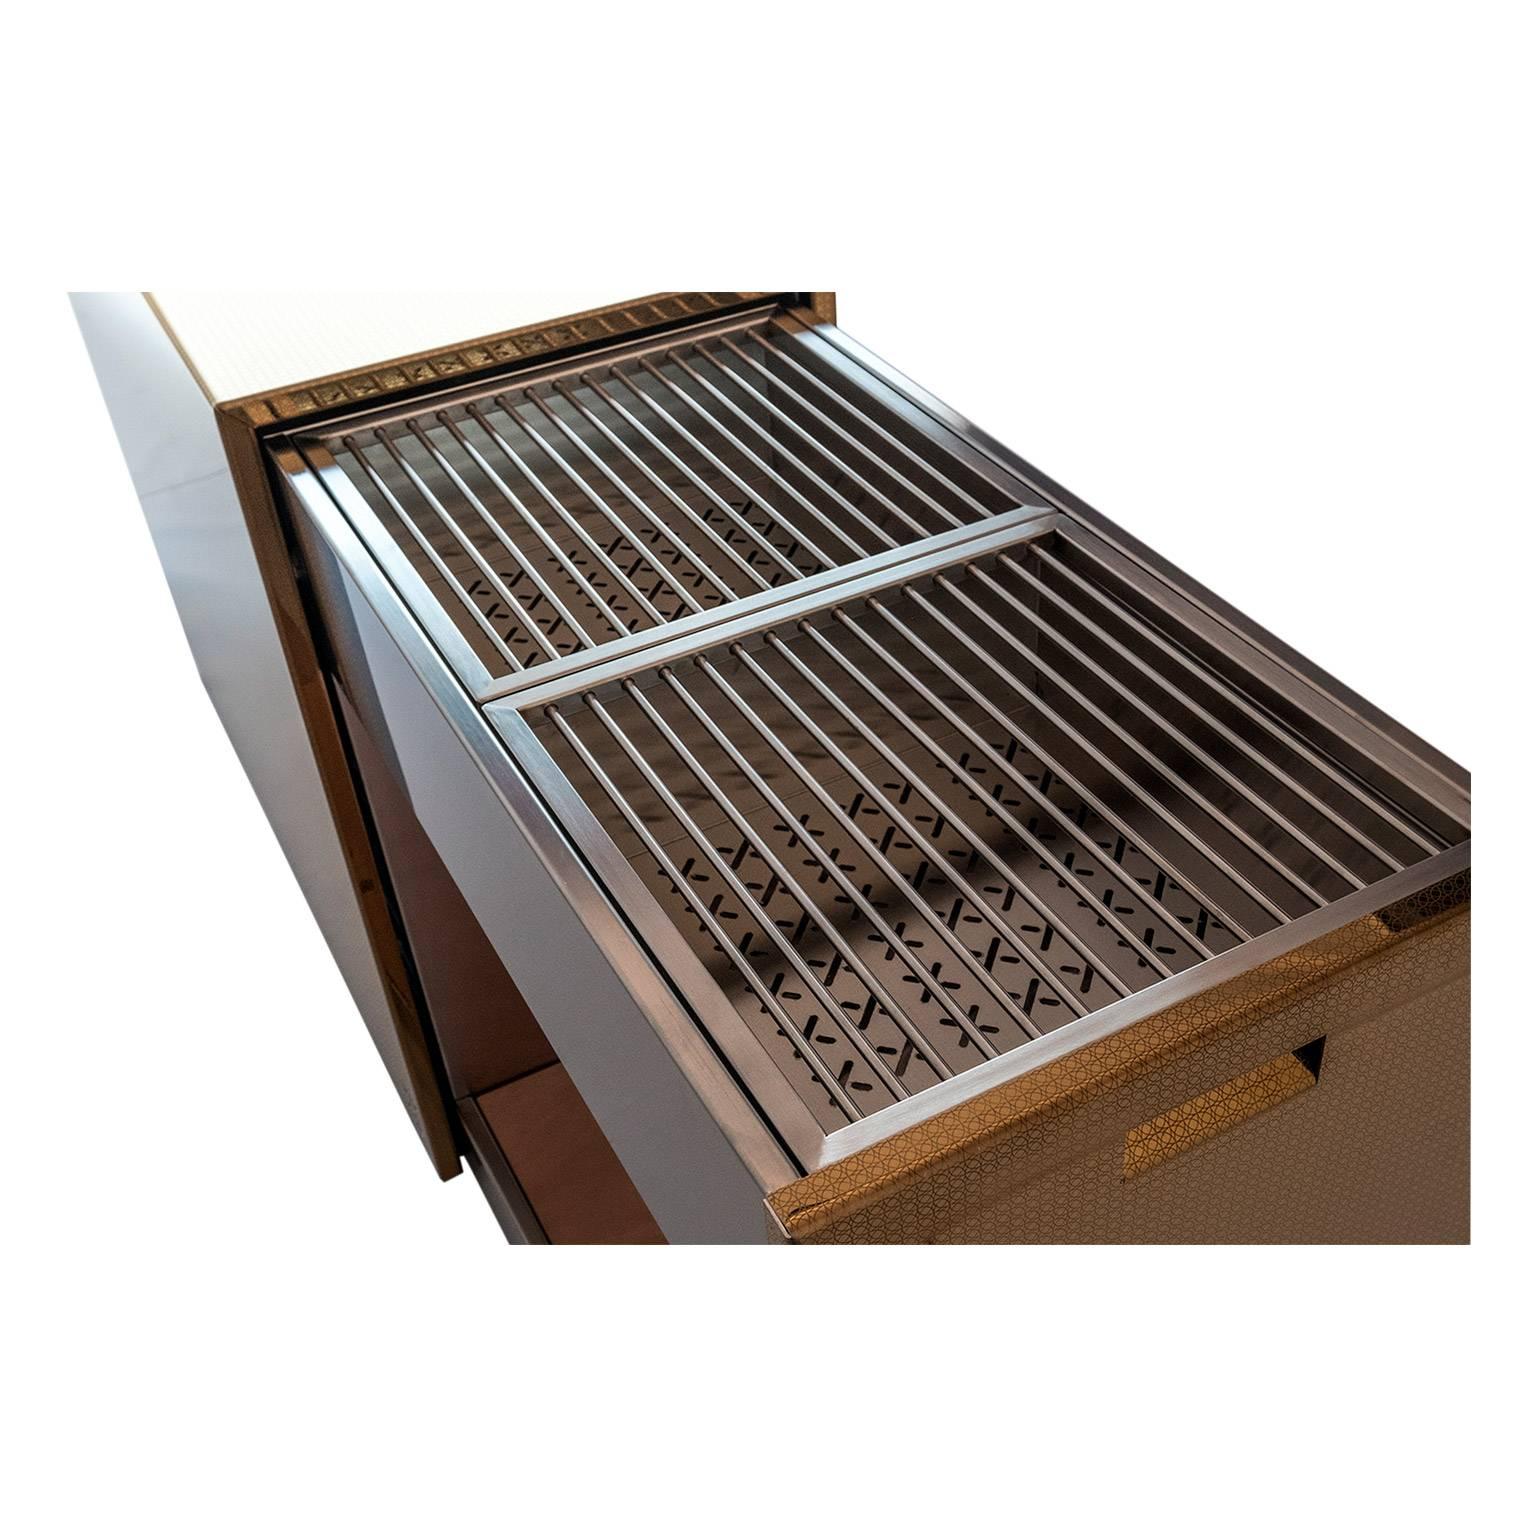 This monolithic charcoal barbecue is elegant and functional with sliding grills and accessories.
The shell protects grills and accessories, it hides and then reveals the extractable soul in stainless steel, that
becomes a comfortable surface for